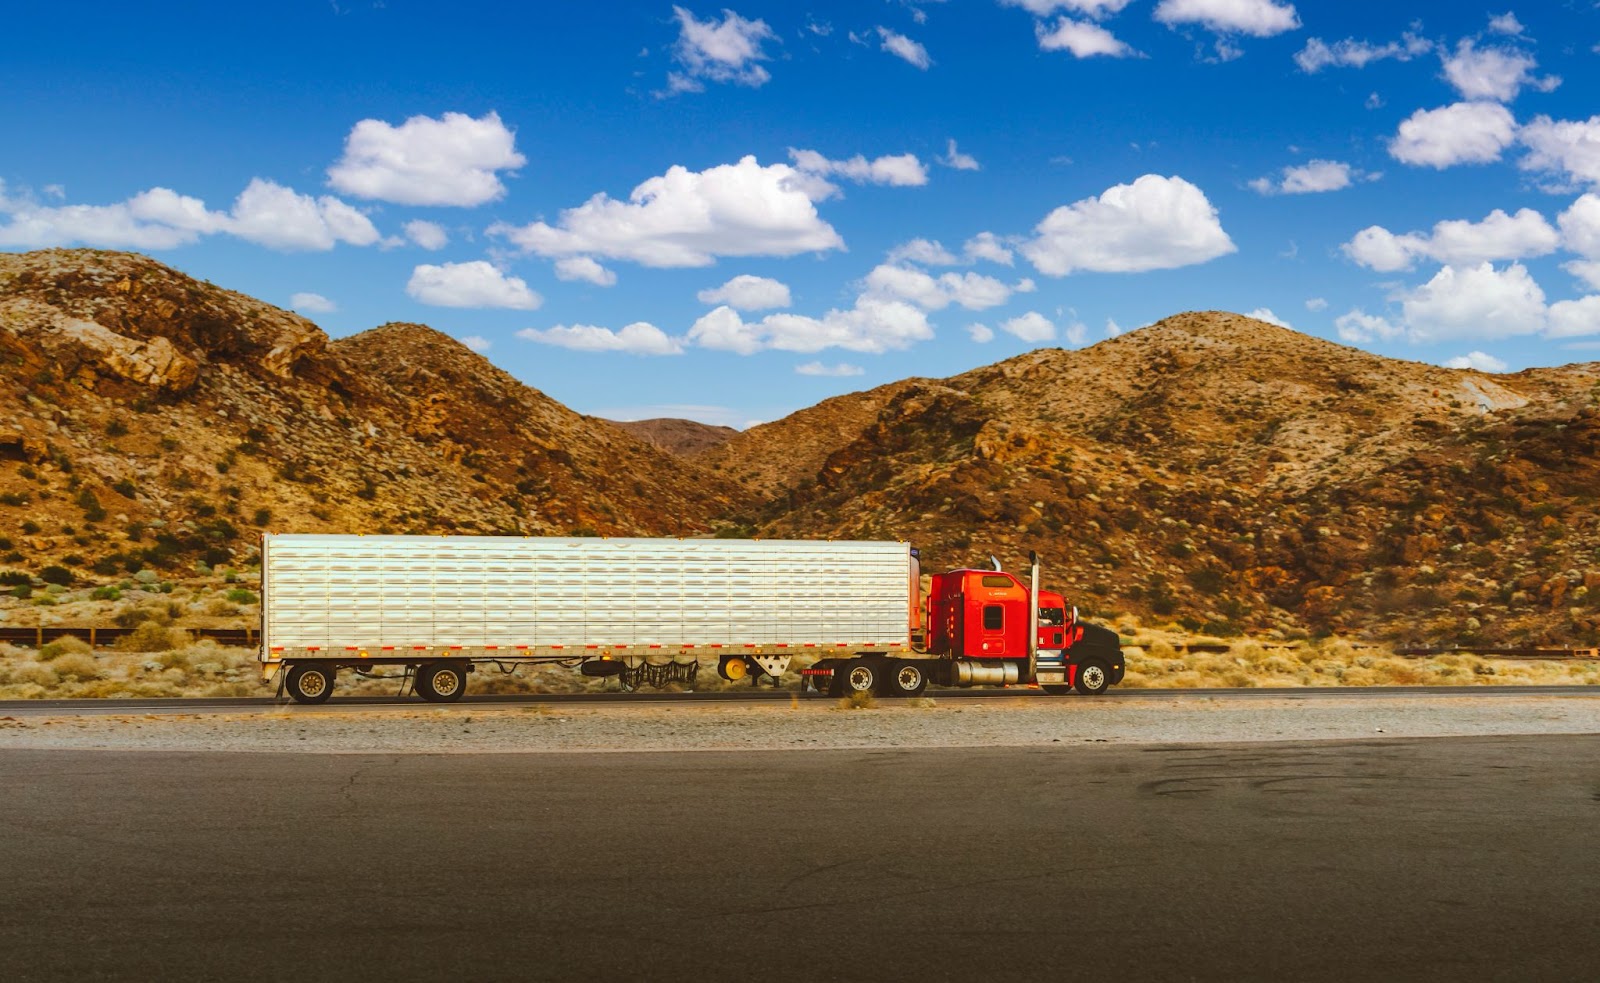 A semi truck with a trailer parked on the side of a road with mountains in the background